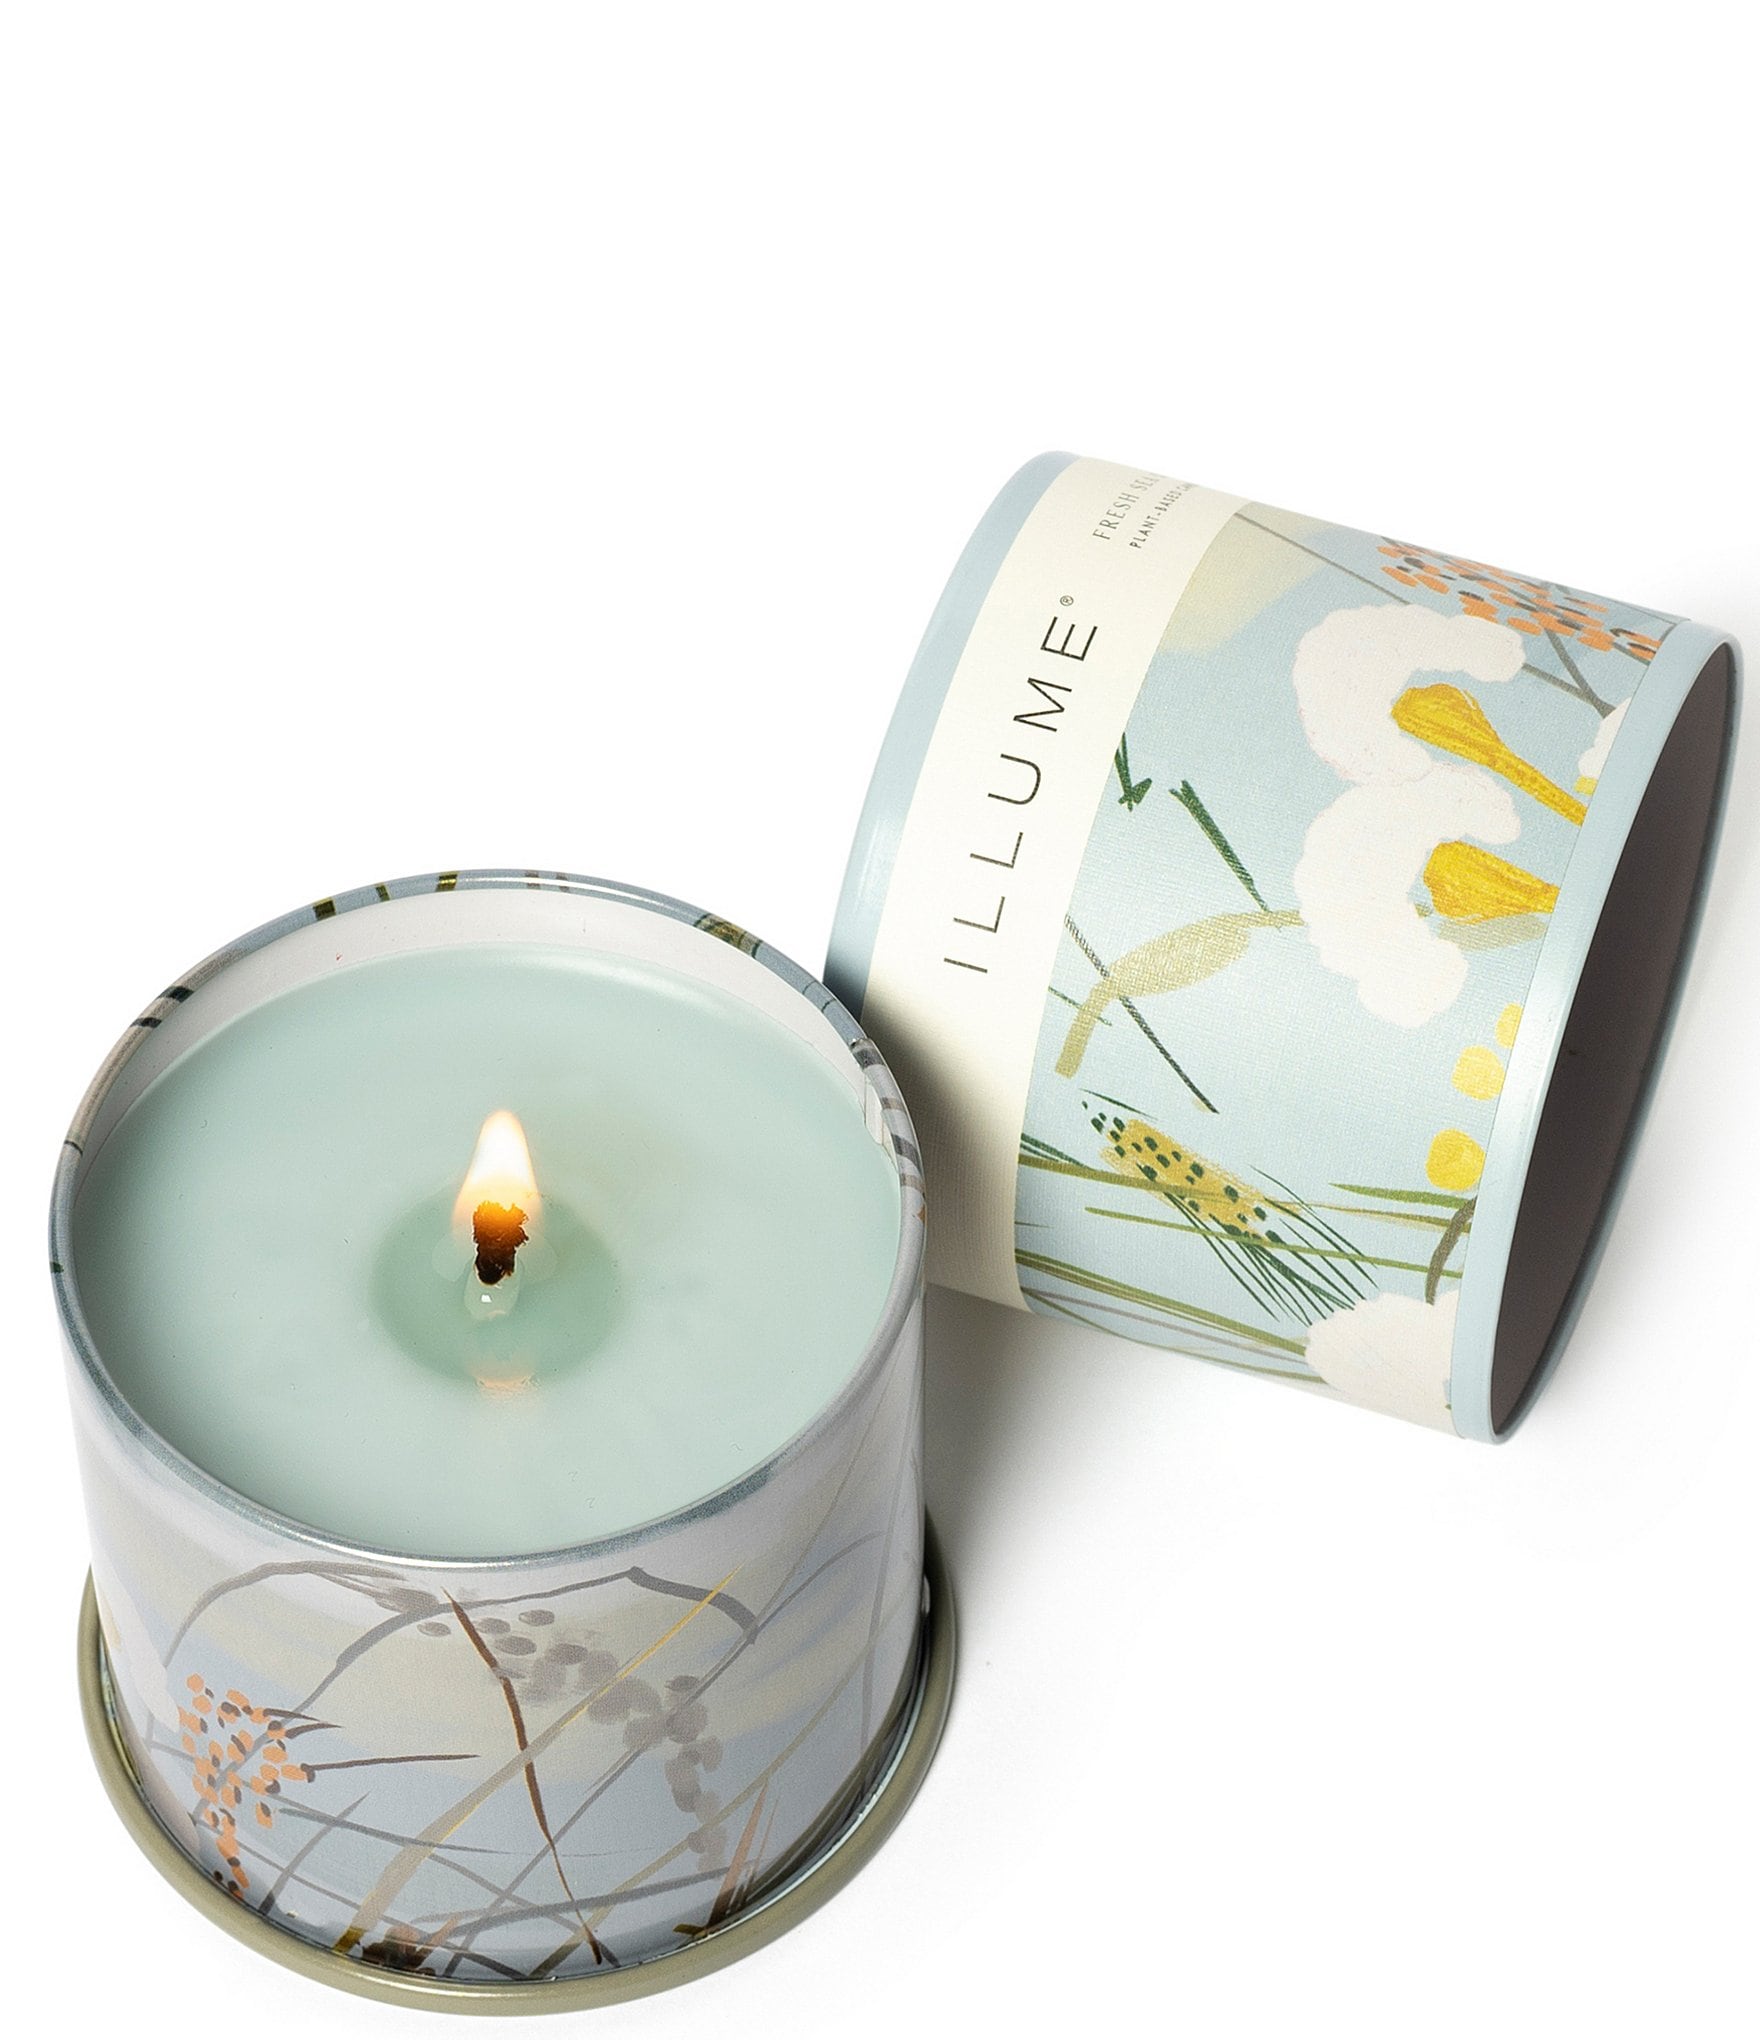 Illume Soy Wax Balsam And Cedar Scented Tin Candle - 11.8 oz